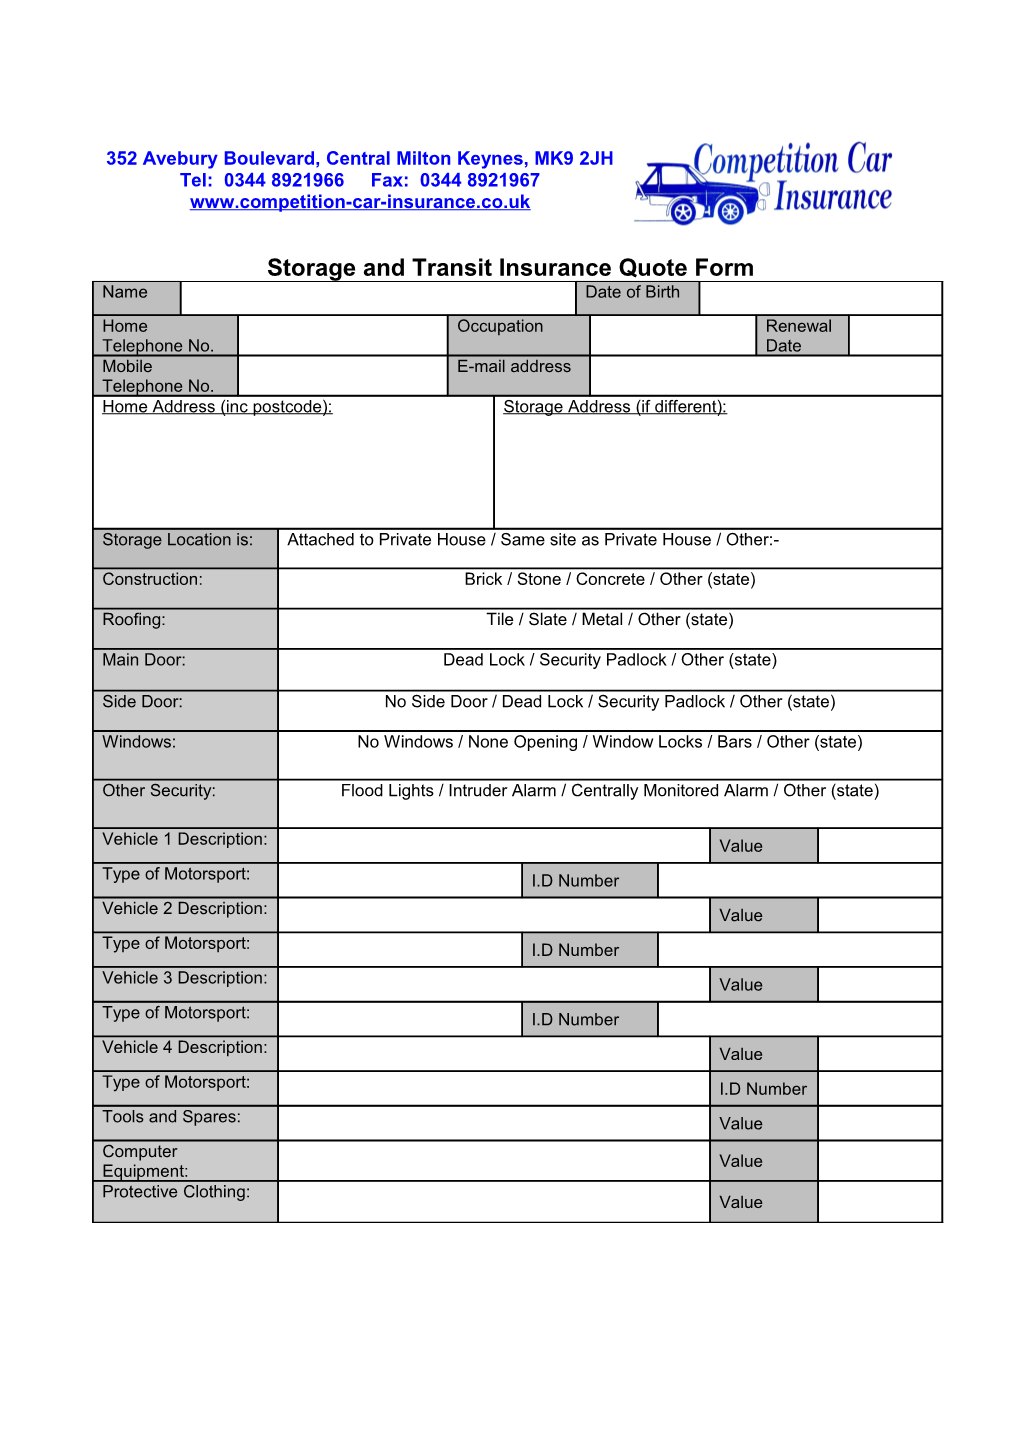 Storage and Transit Insurance Quote Form